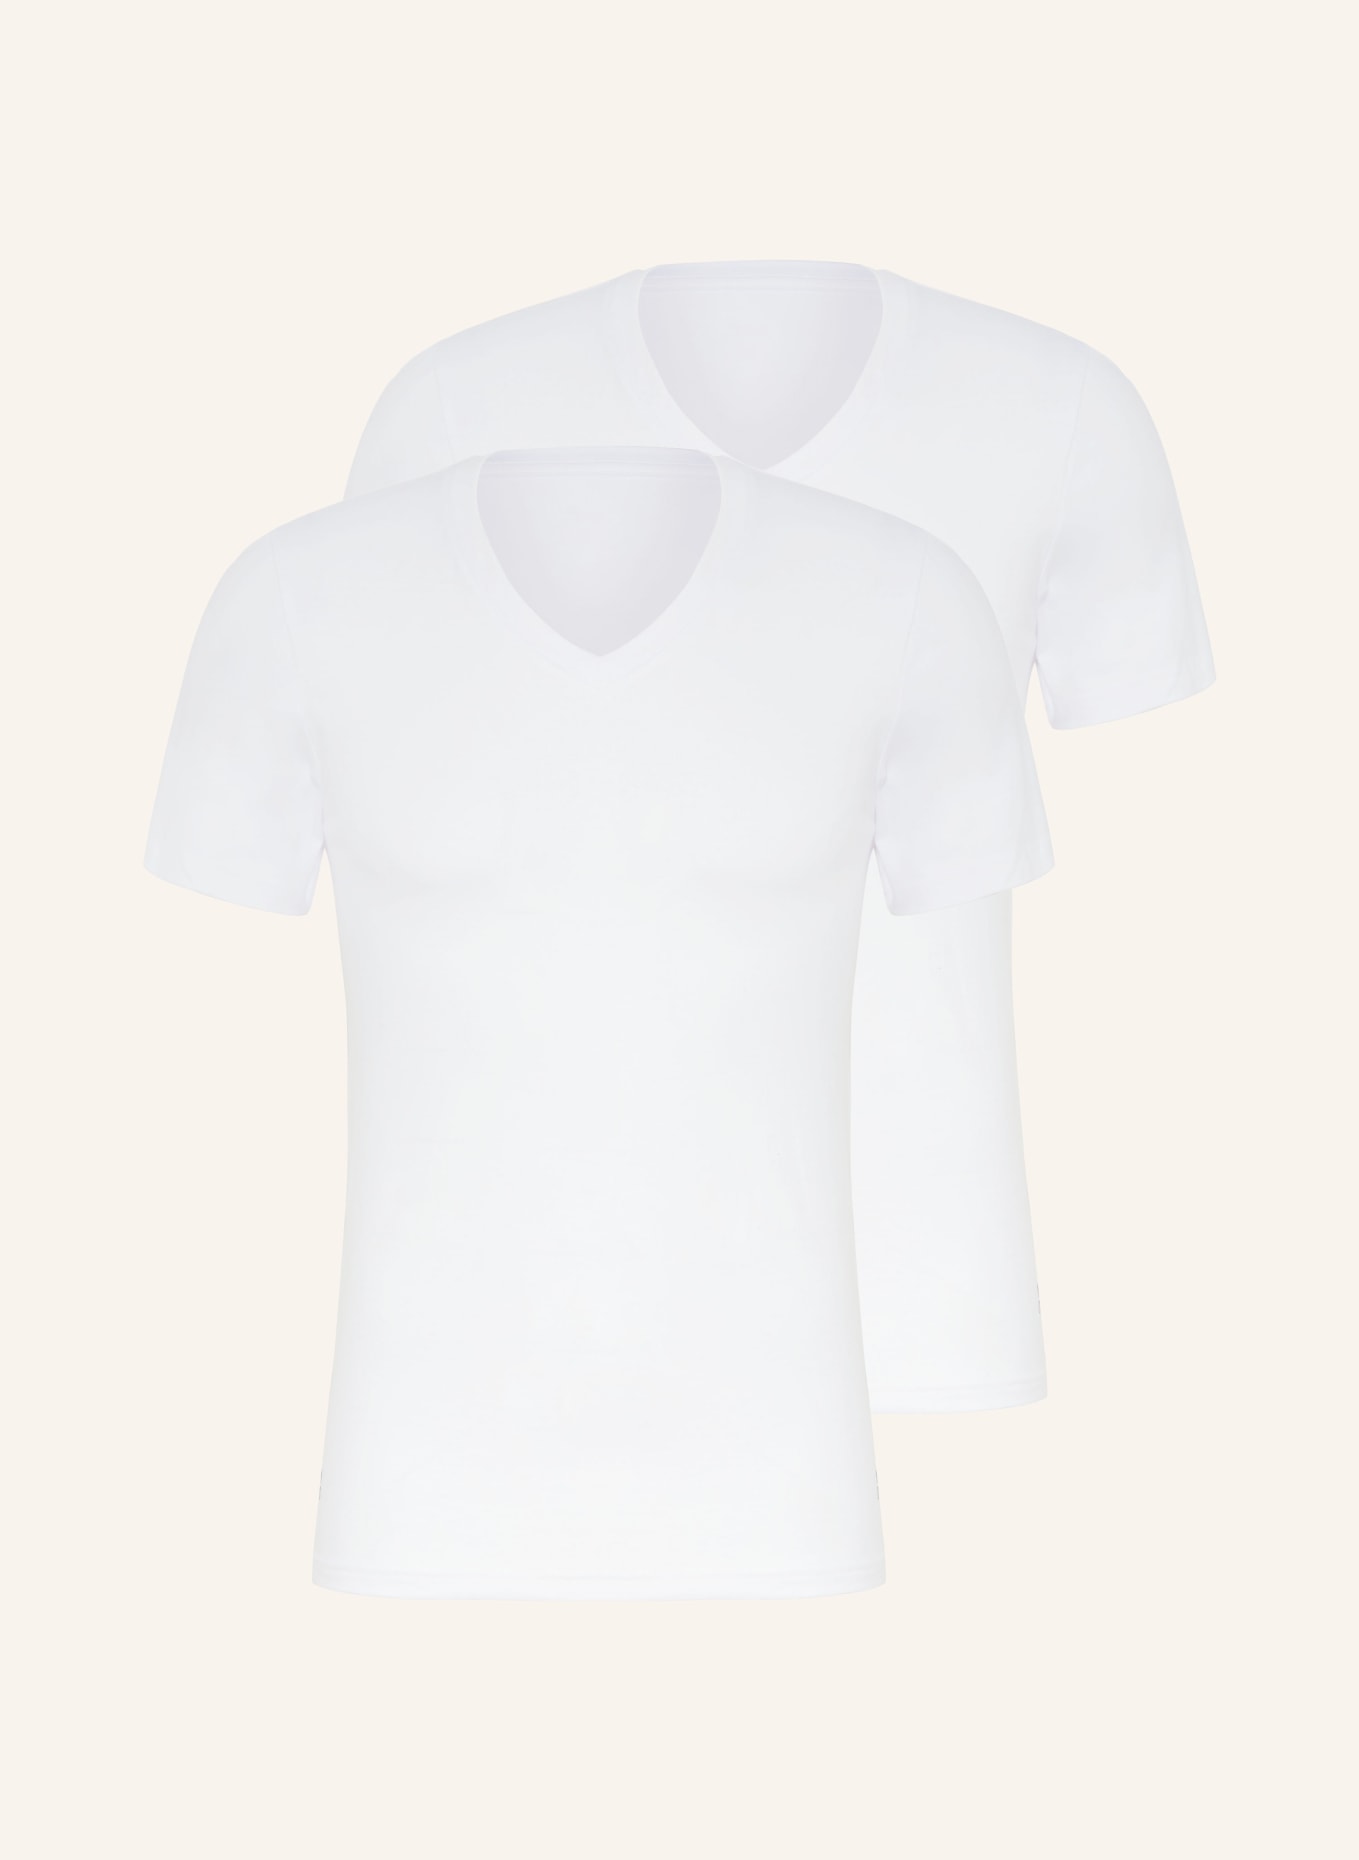 Marc O'Polo 2er-Pack V-Shirts, Farbe: WEISS (Bild 1)